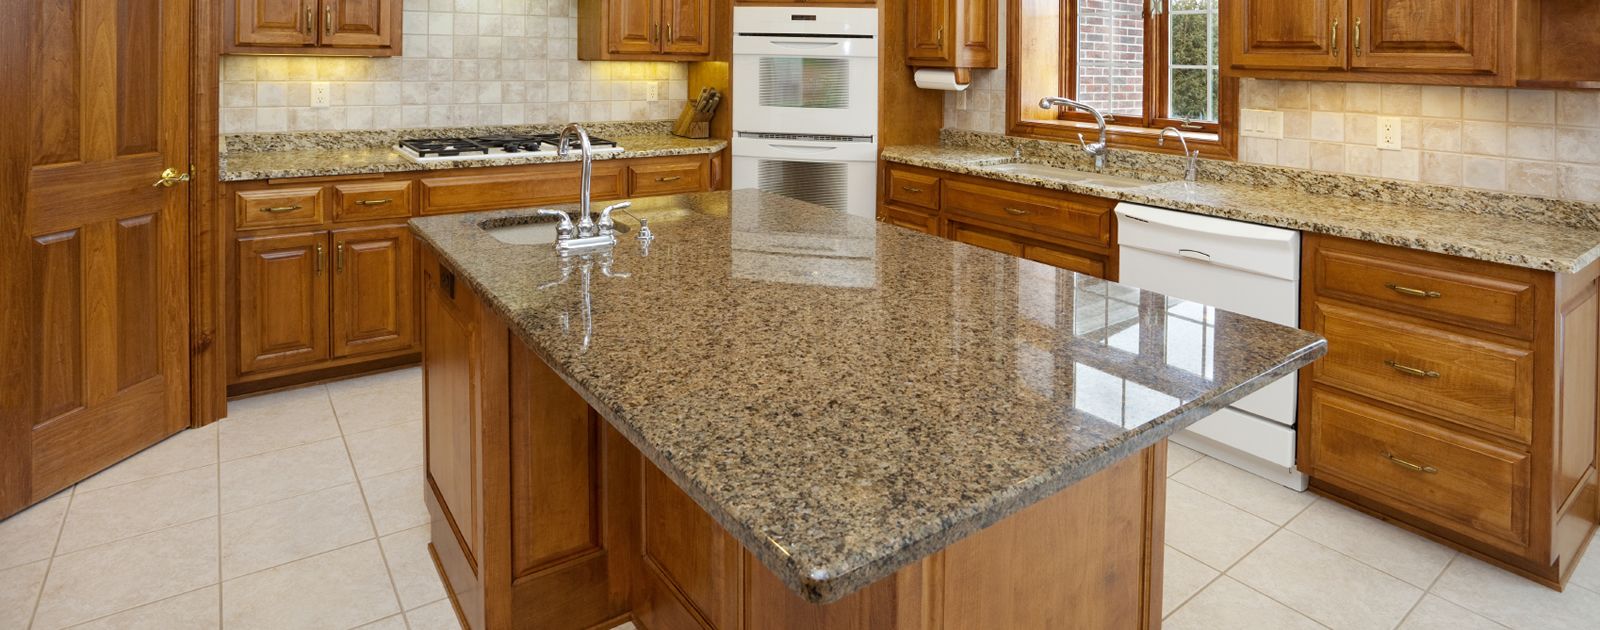 Countertops at affordable prices